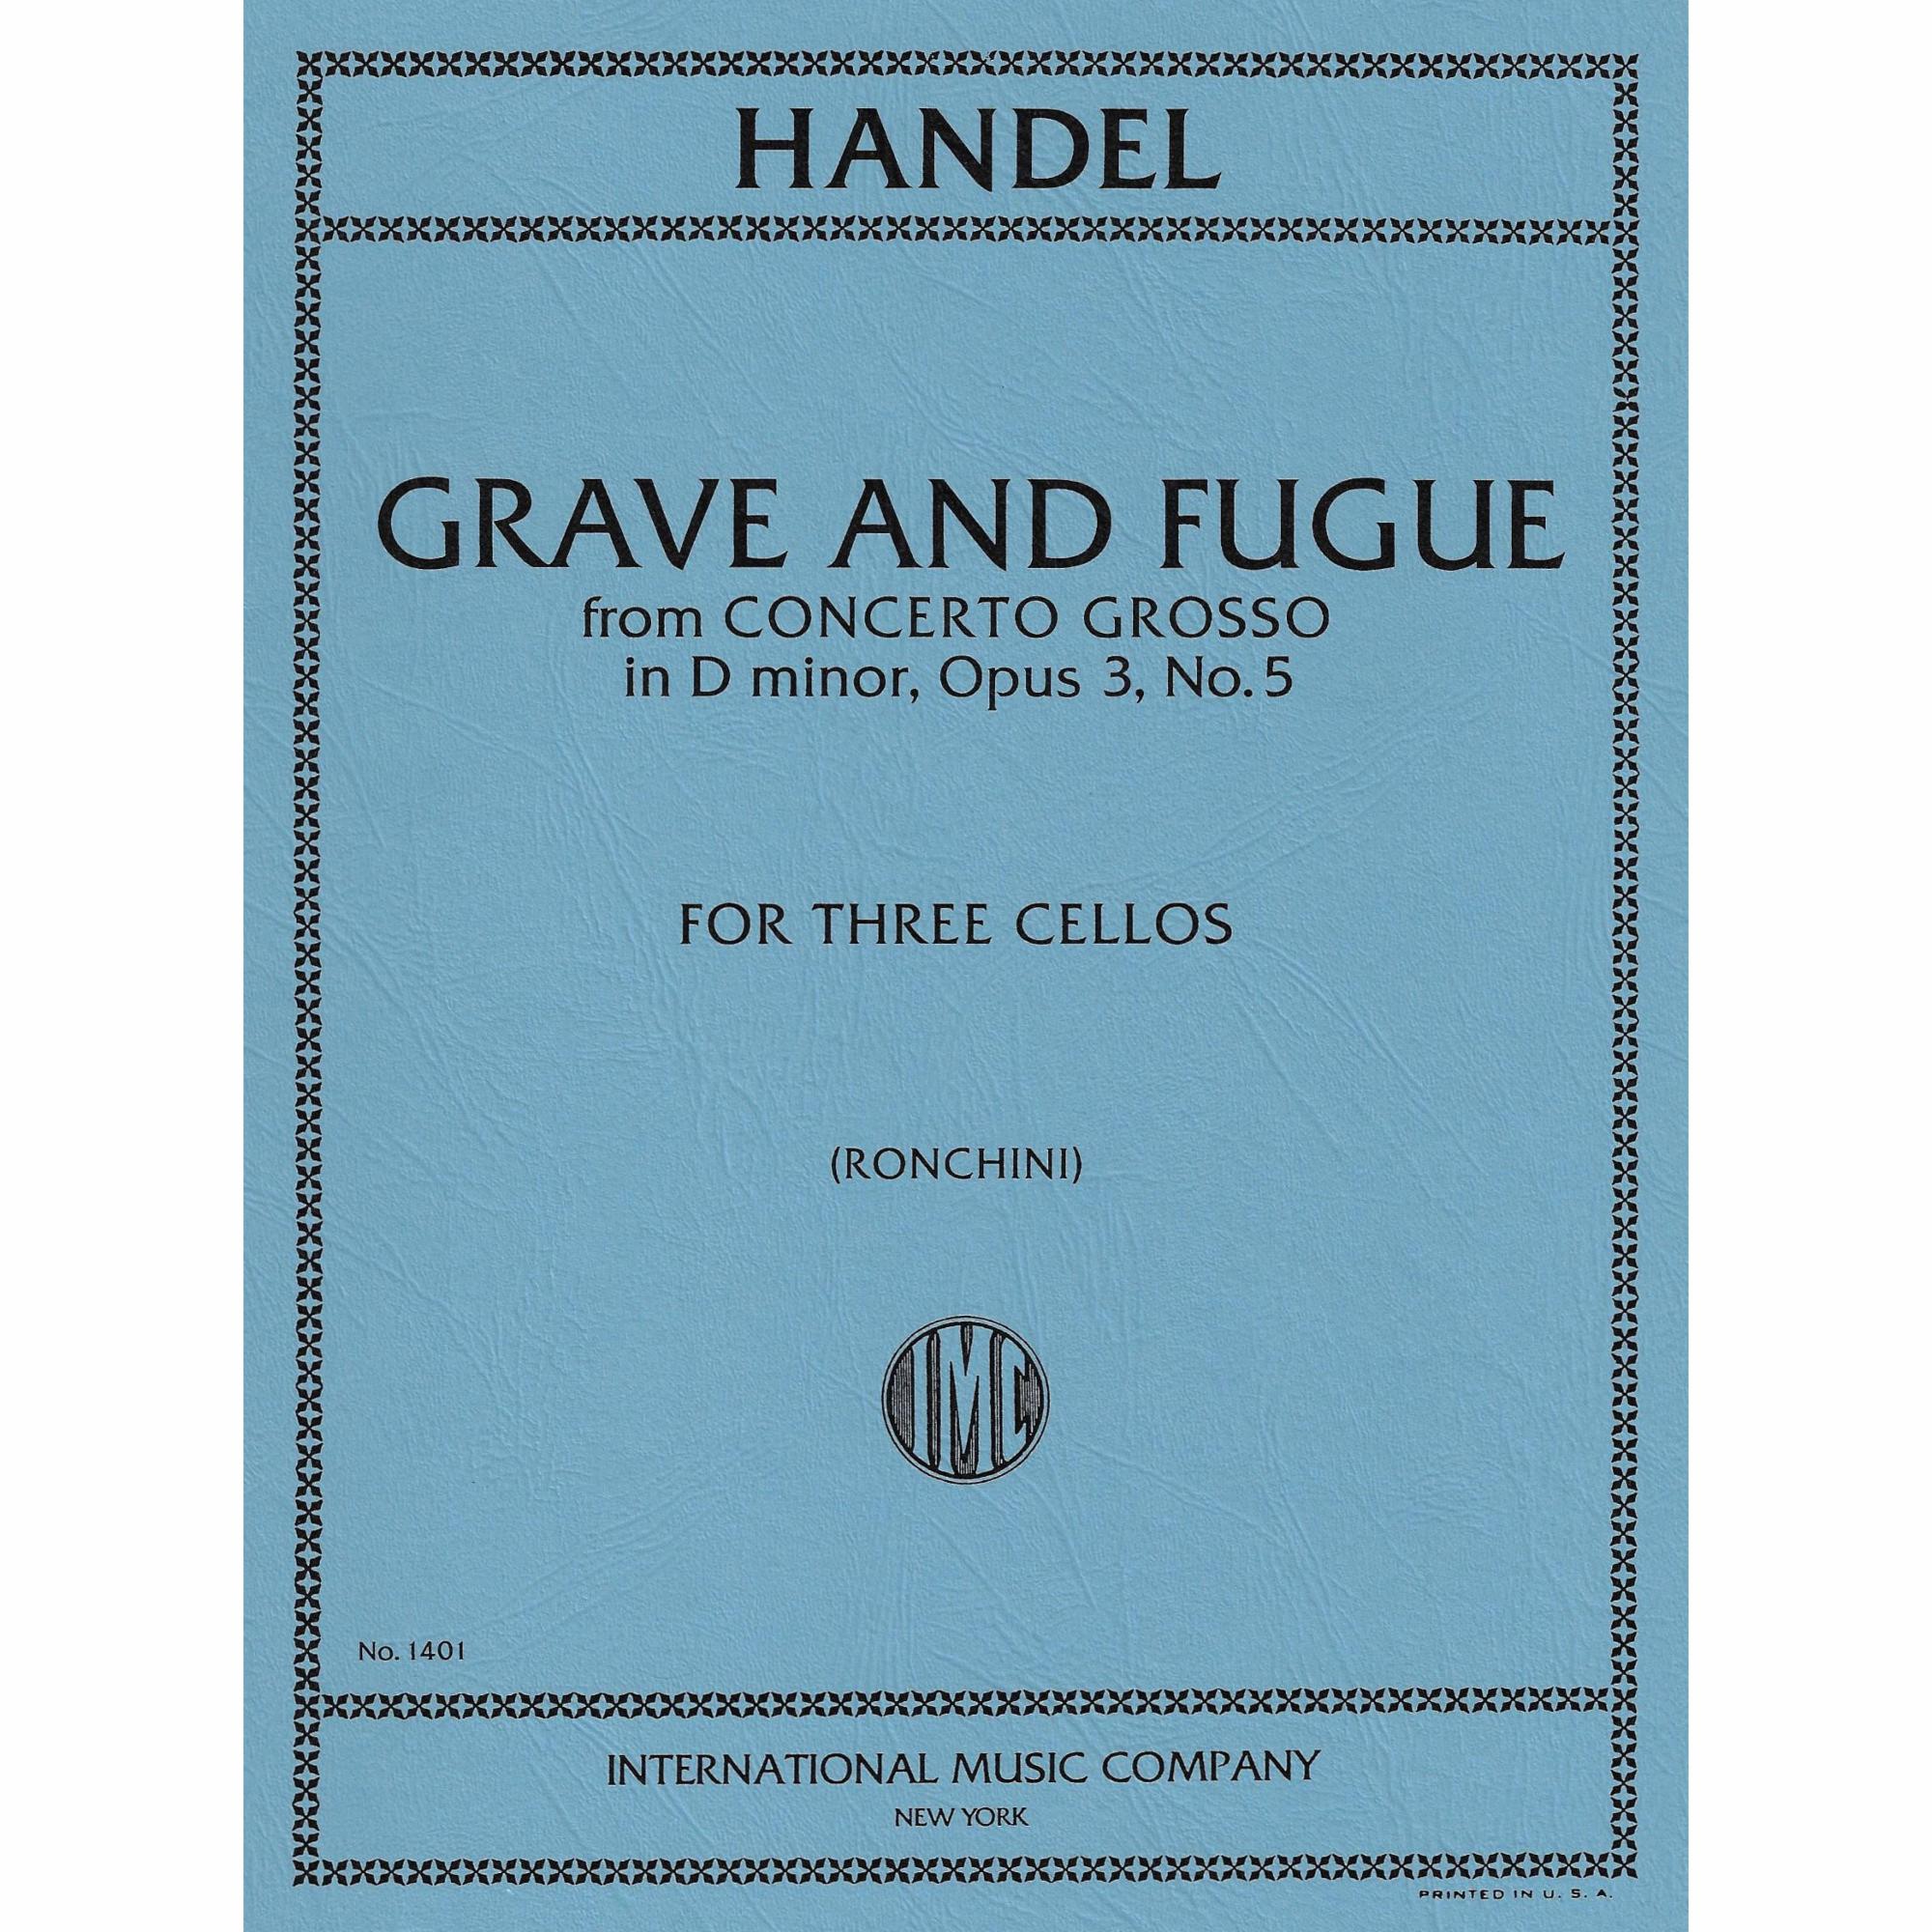 Handel -- Grave and Fugue, from Concerto Grosso in D Minor, Op. 3, No. 5 for Three Cellos